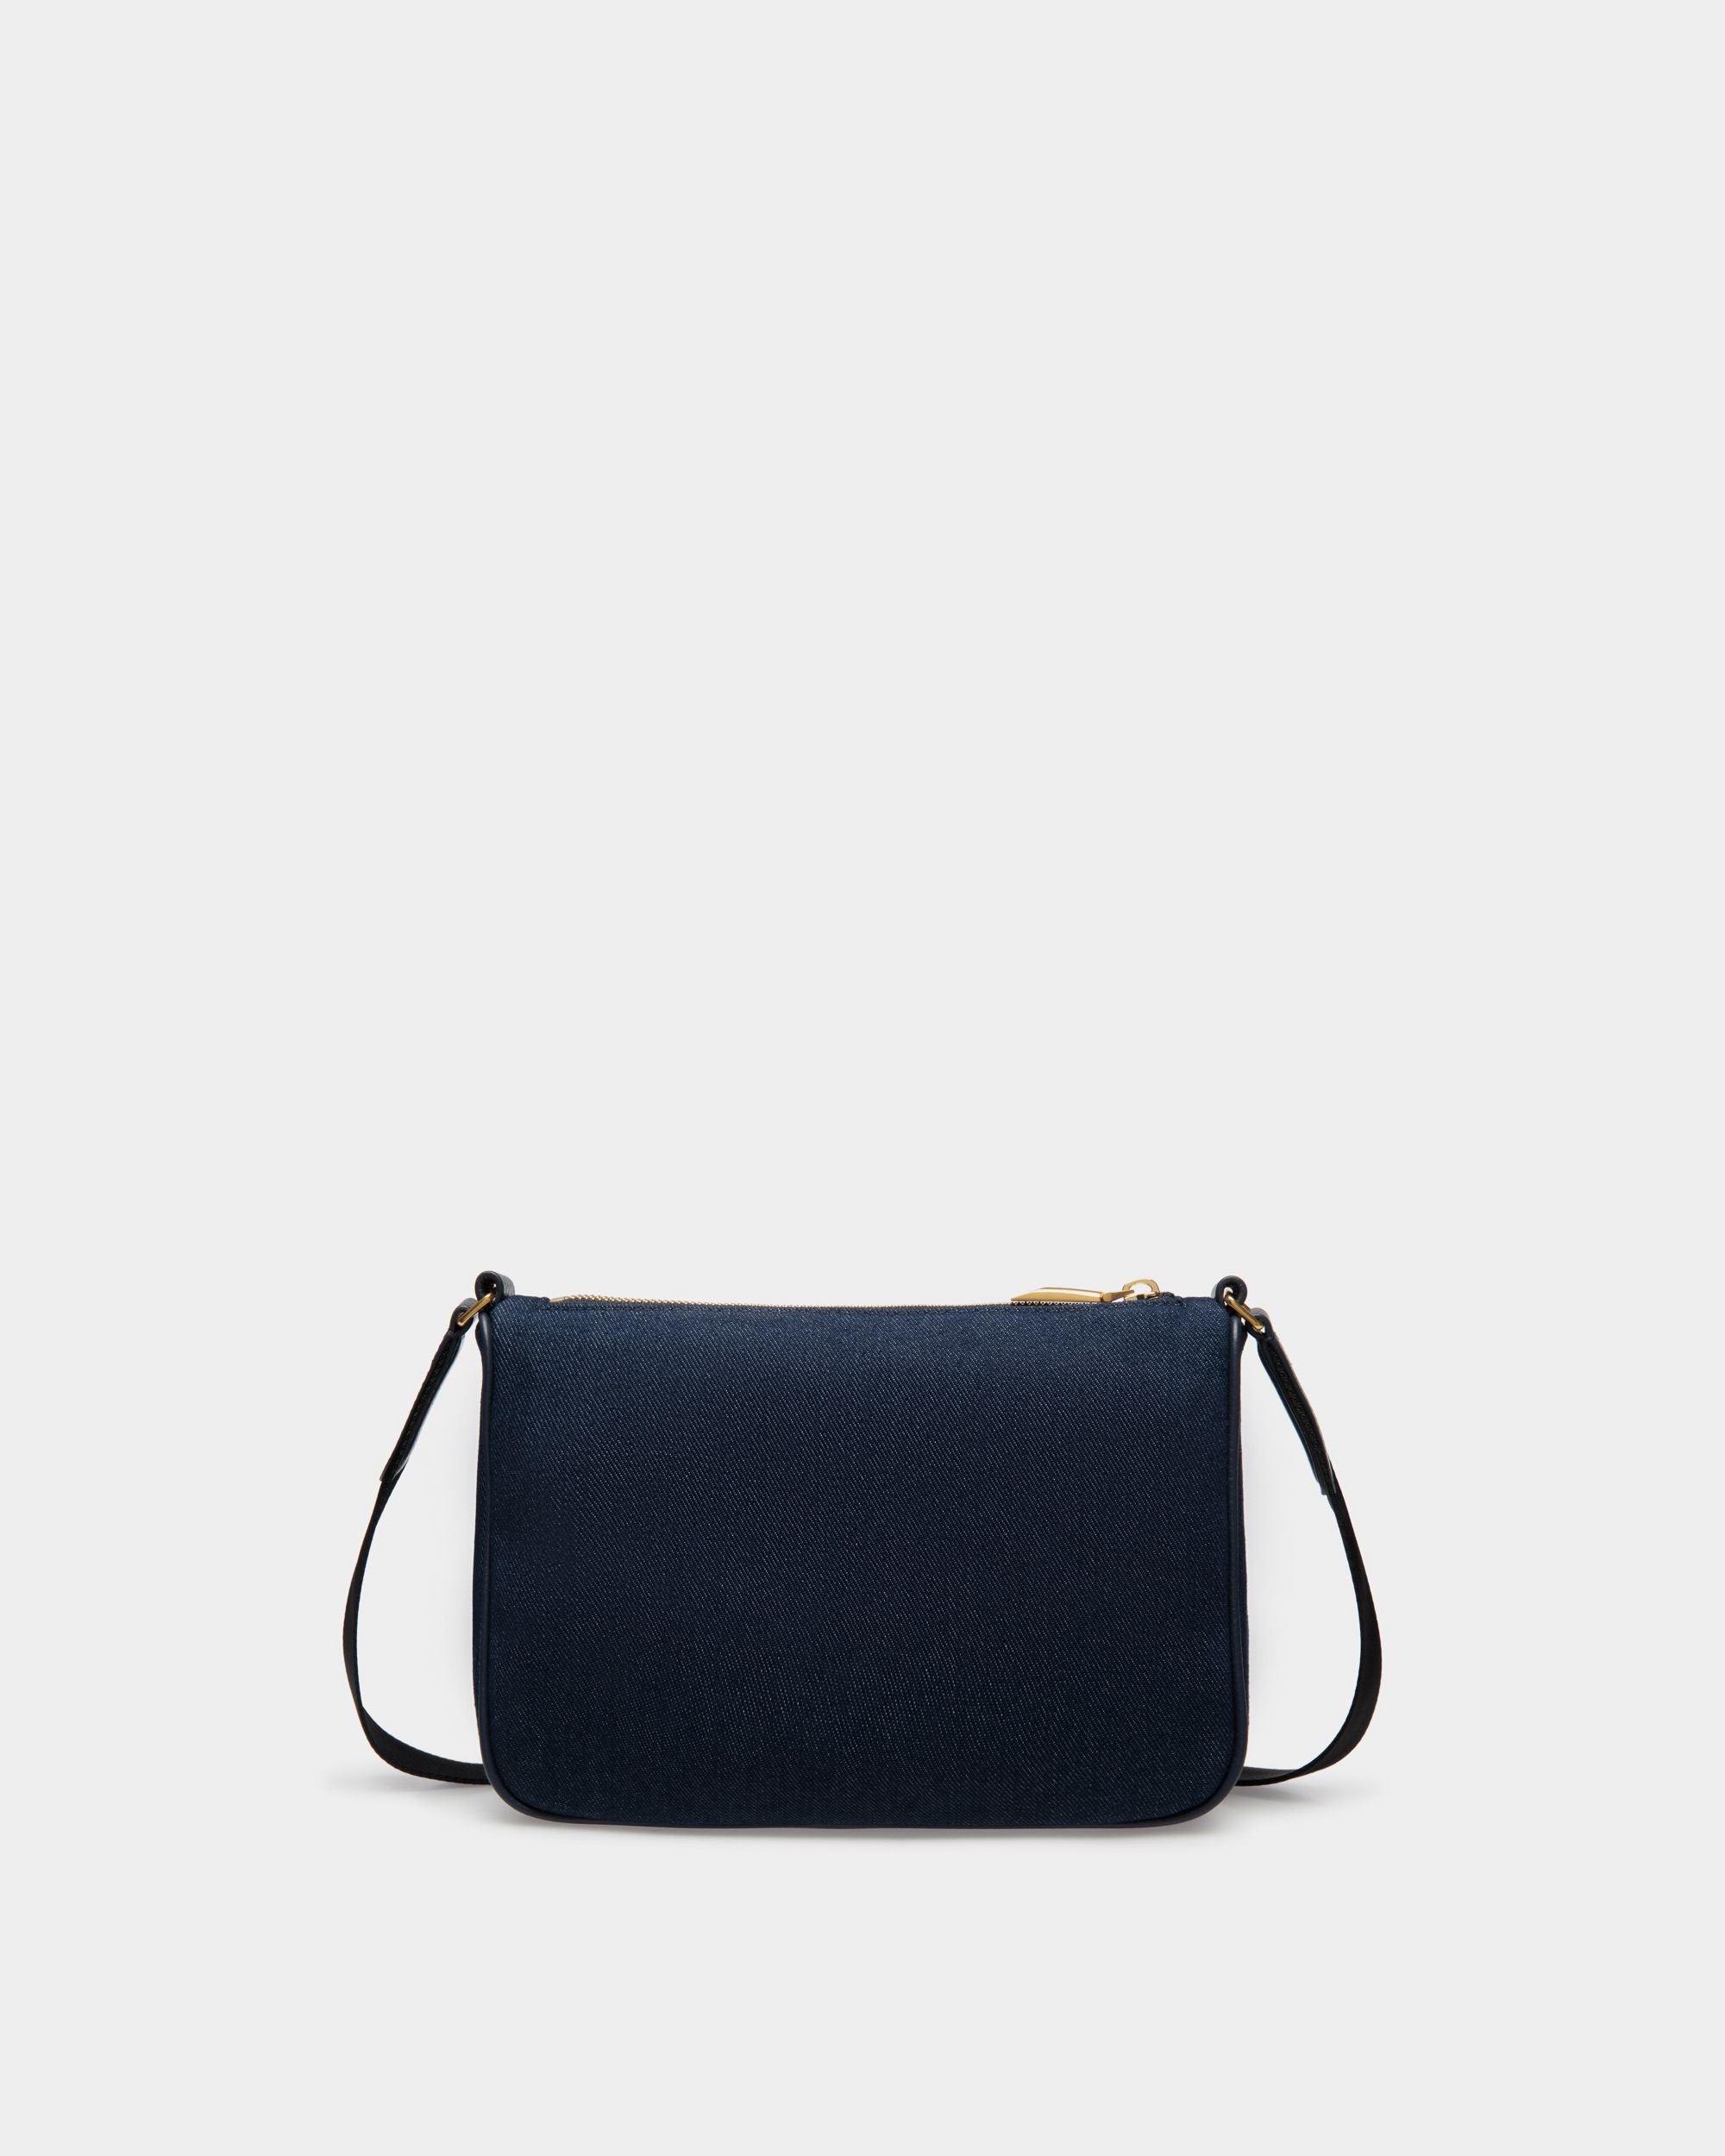 Bar | Men's Crossbody Bag in Blue Canvas And Leather | Bally | Still Life Back